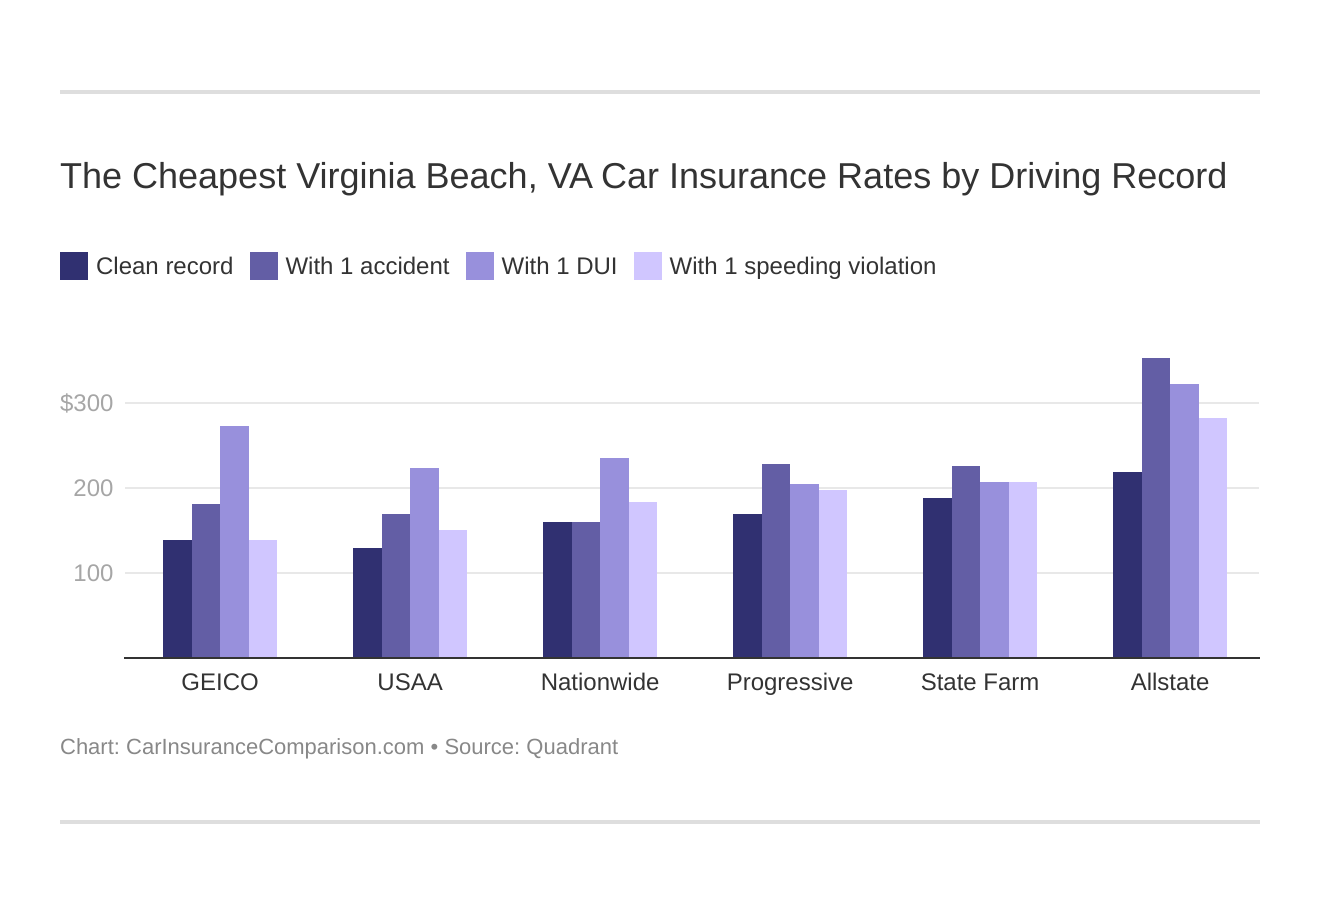 The Cheapest Virginia Beach, VA Car Insurance Rates by Driving Record